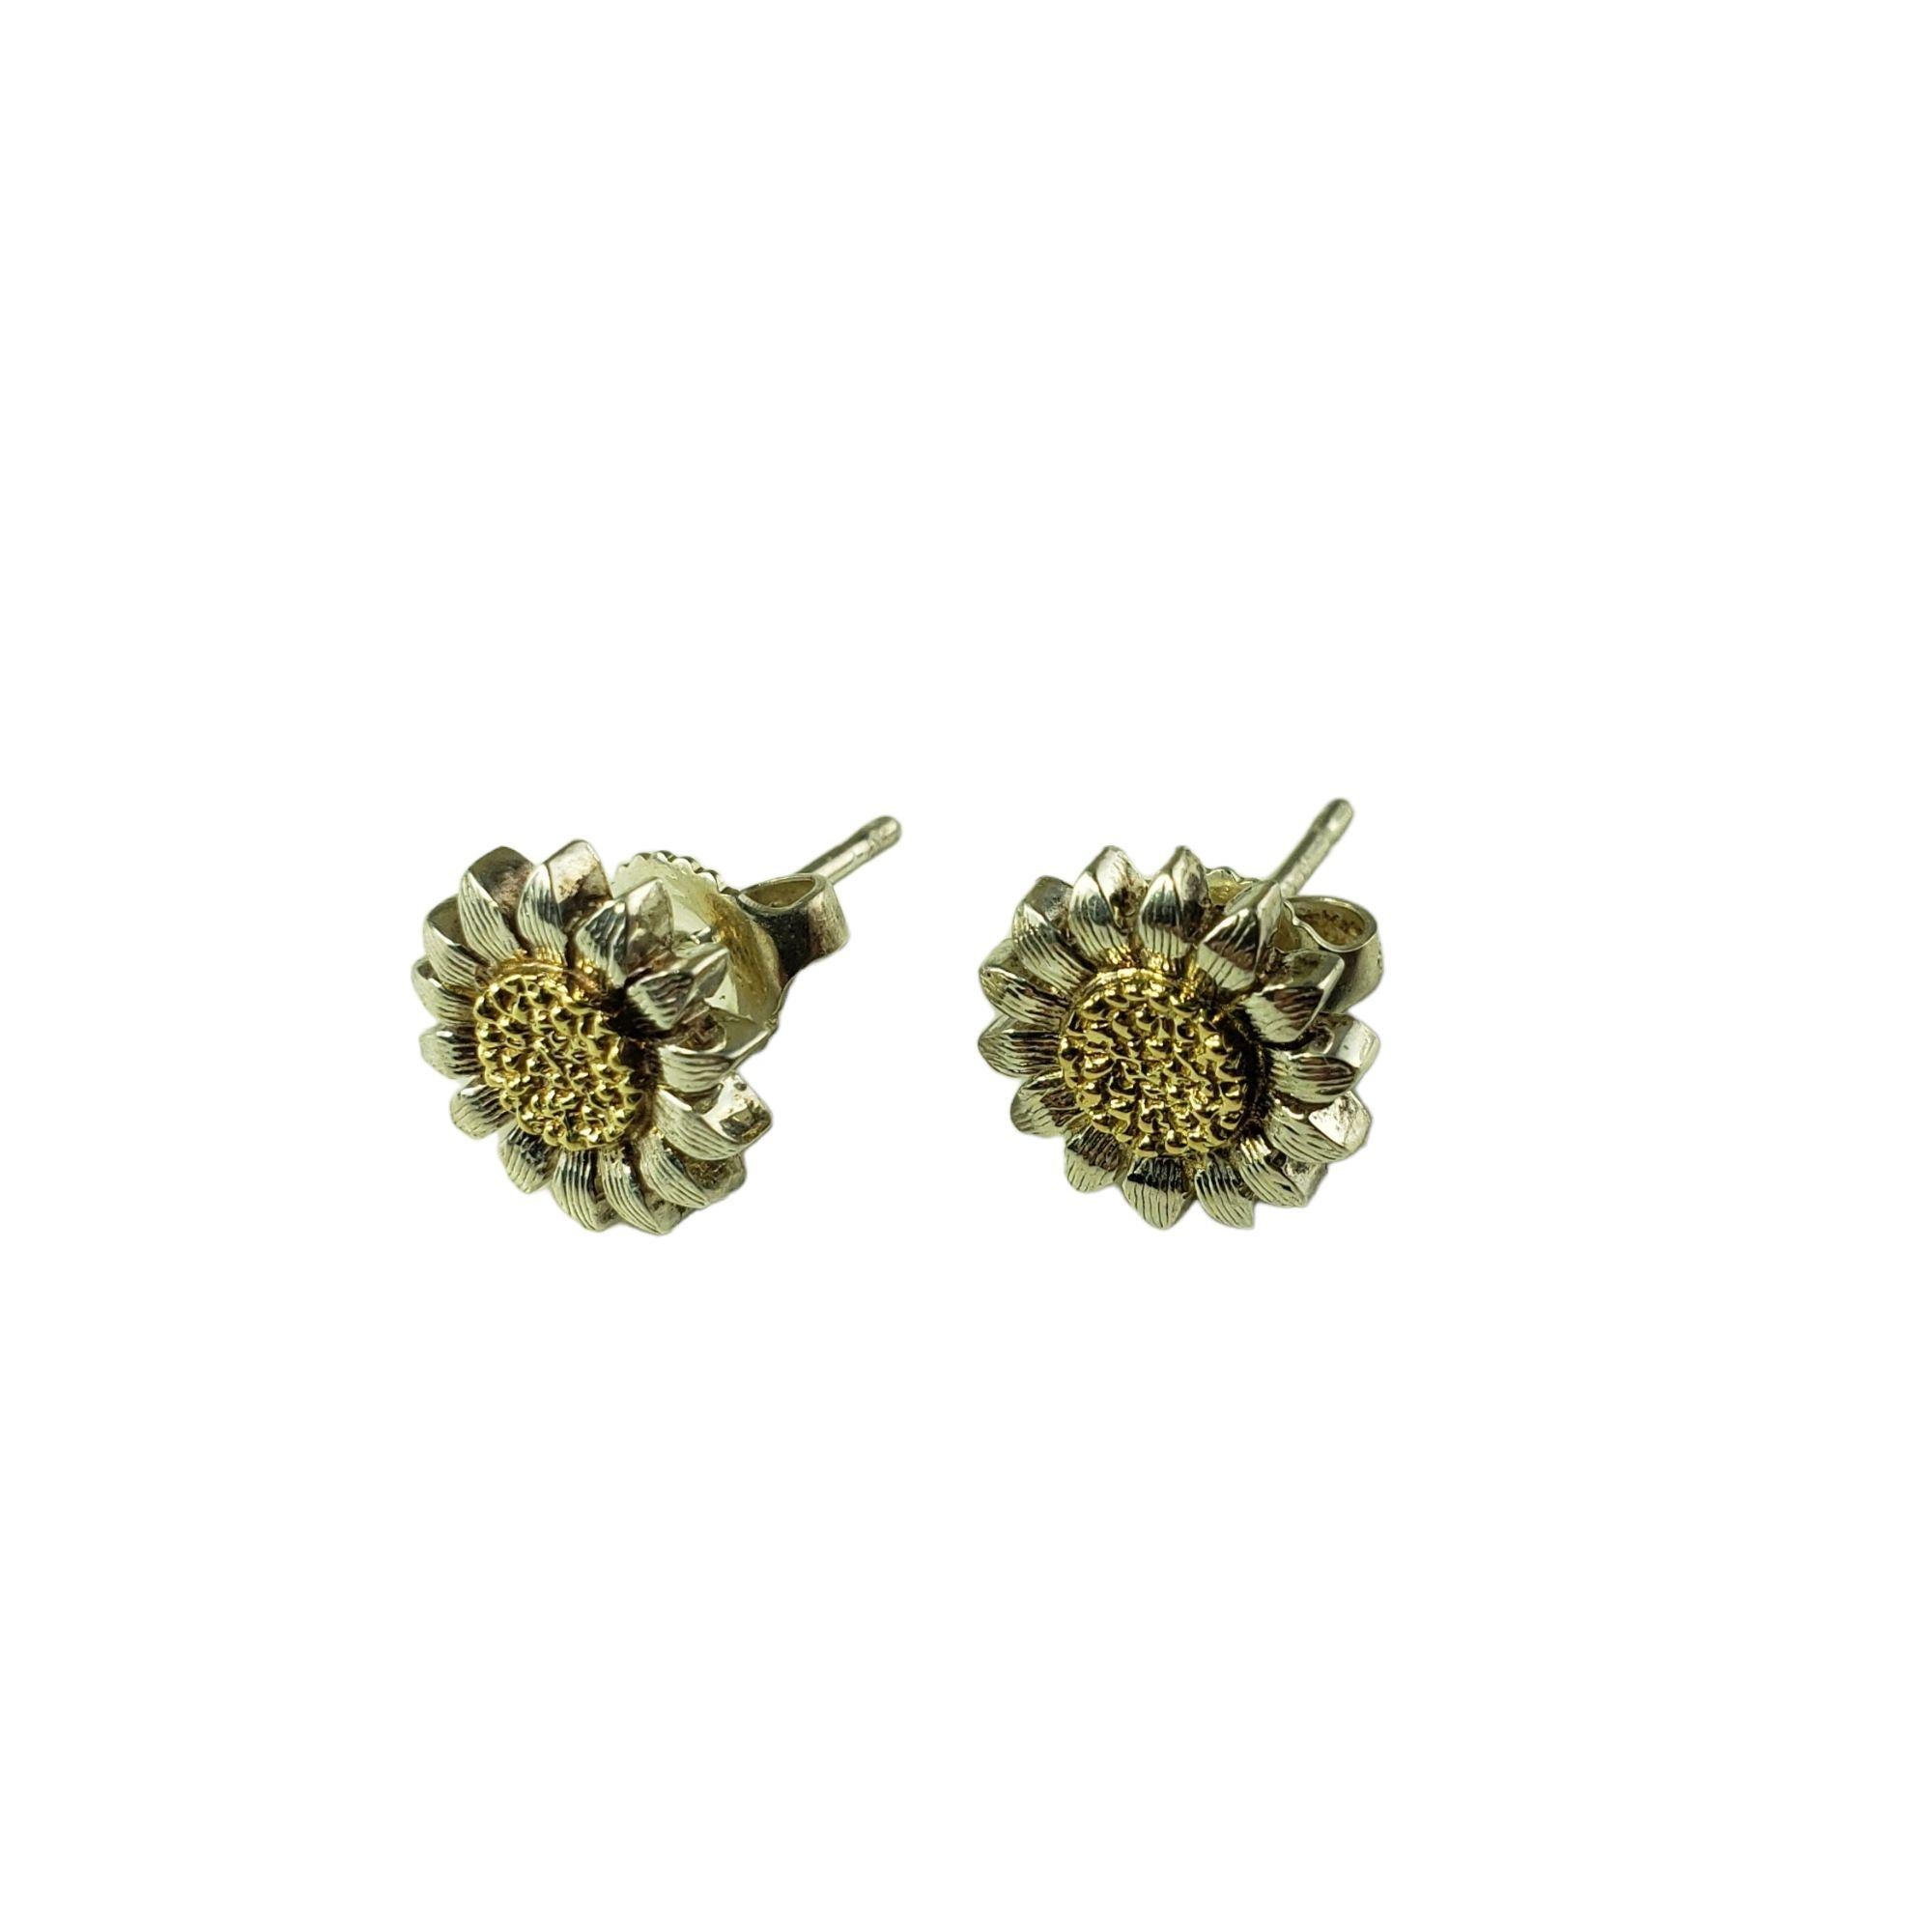 Bielka Sterling Silver and 18 Karat Yellow Gold Sunflower Earrings-

These lovely sunflower earrings are crafted in meticulously detailed sterling silver and 18K yellow gold.

Size: 10 mm

Weight: 2.9 gr./ 1.8 dwt.

Stamped: Sterling 18K RBB

Very